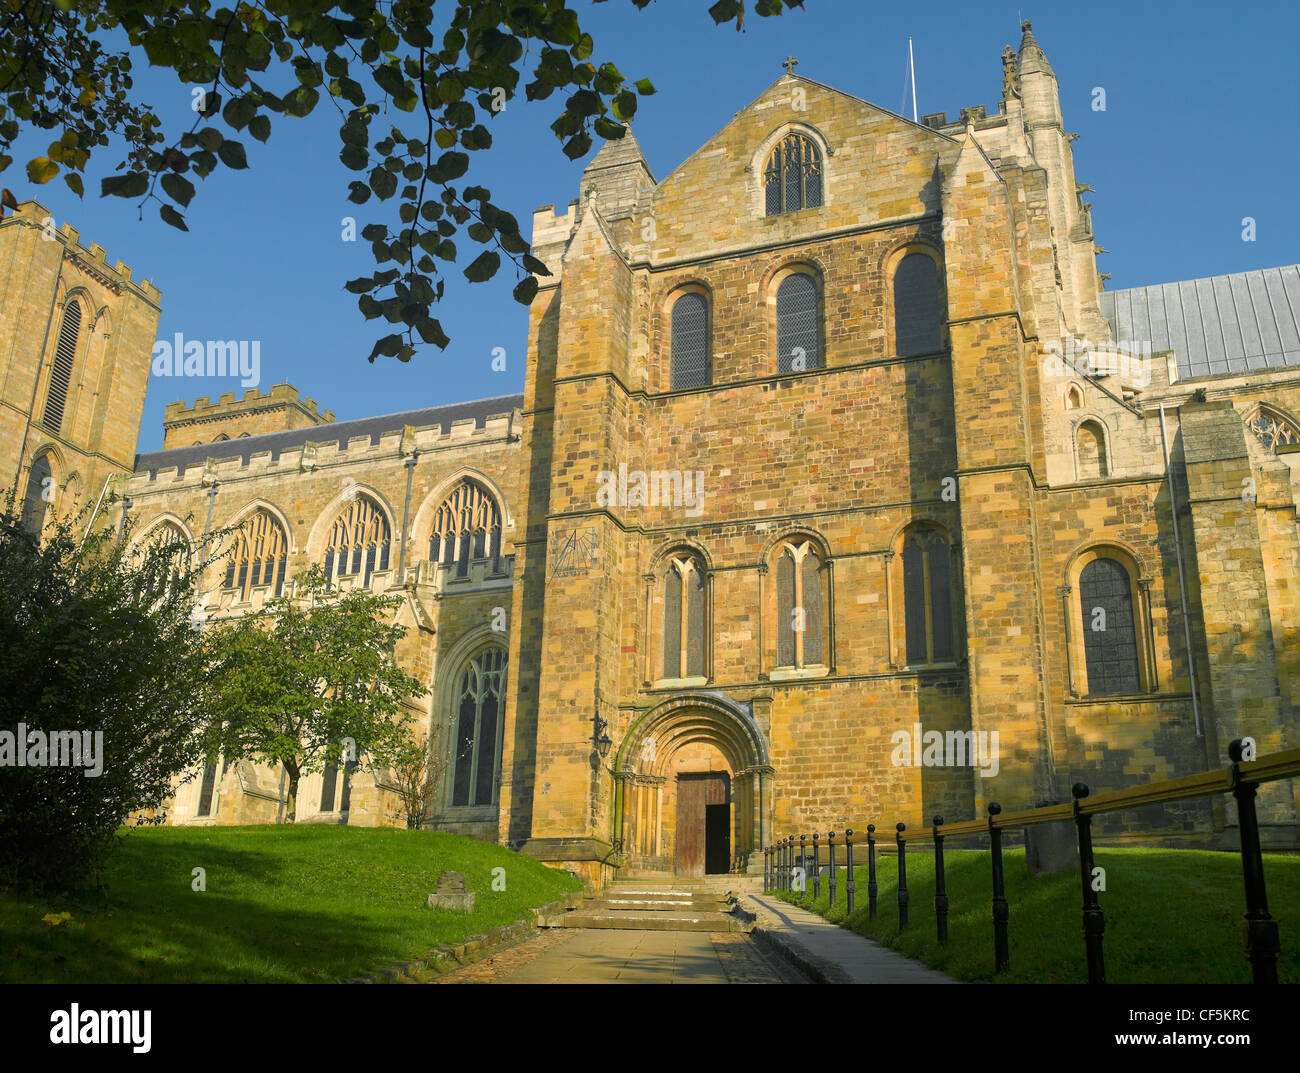 The South Transept entrance to Ripon Cathedral, one of the oldest sites of continuous Christian worship in Great Britain. Stock Photo